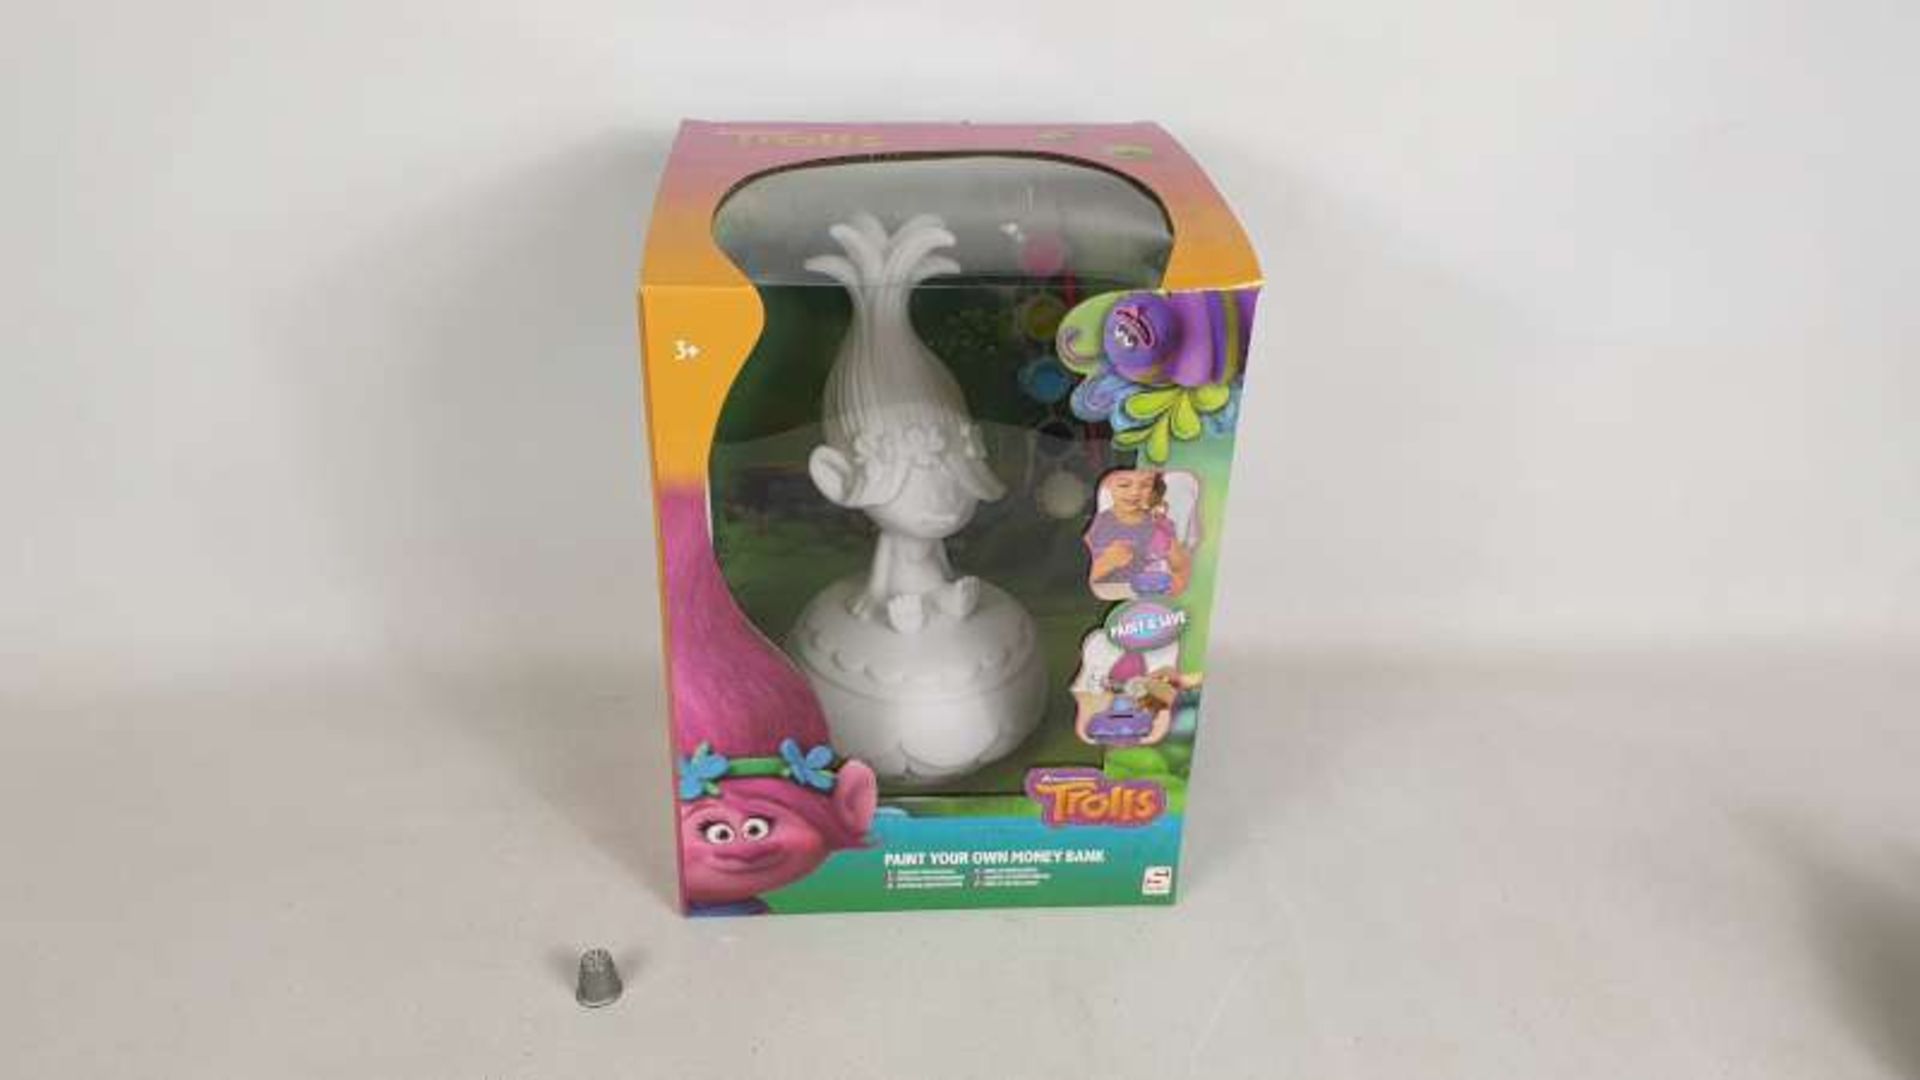 24 X BRAND NEW DREAMWORKS TROLLS PAINT YOUR OWN MONEY BANK IN 4 BOXES